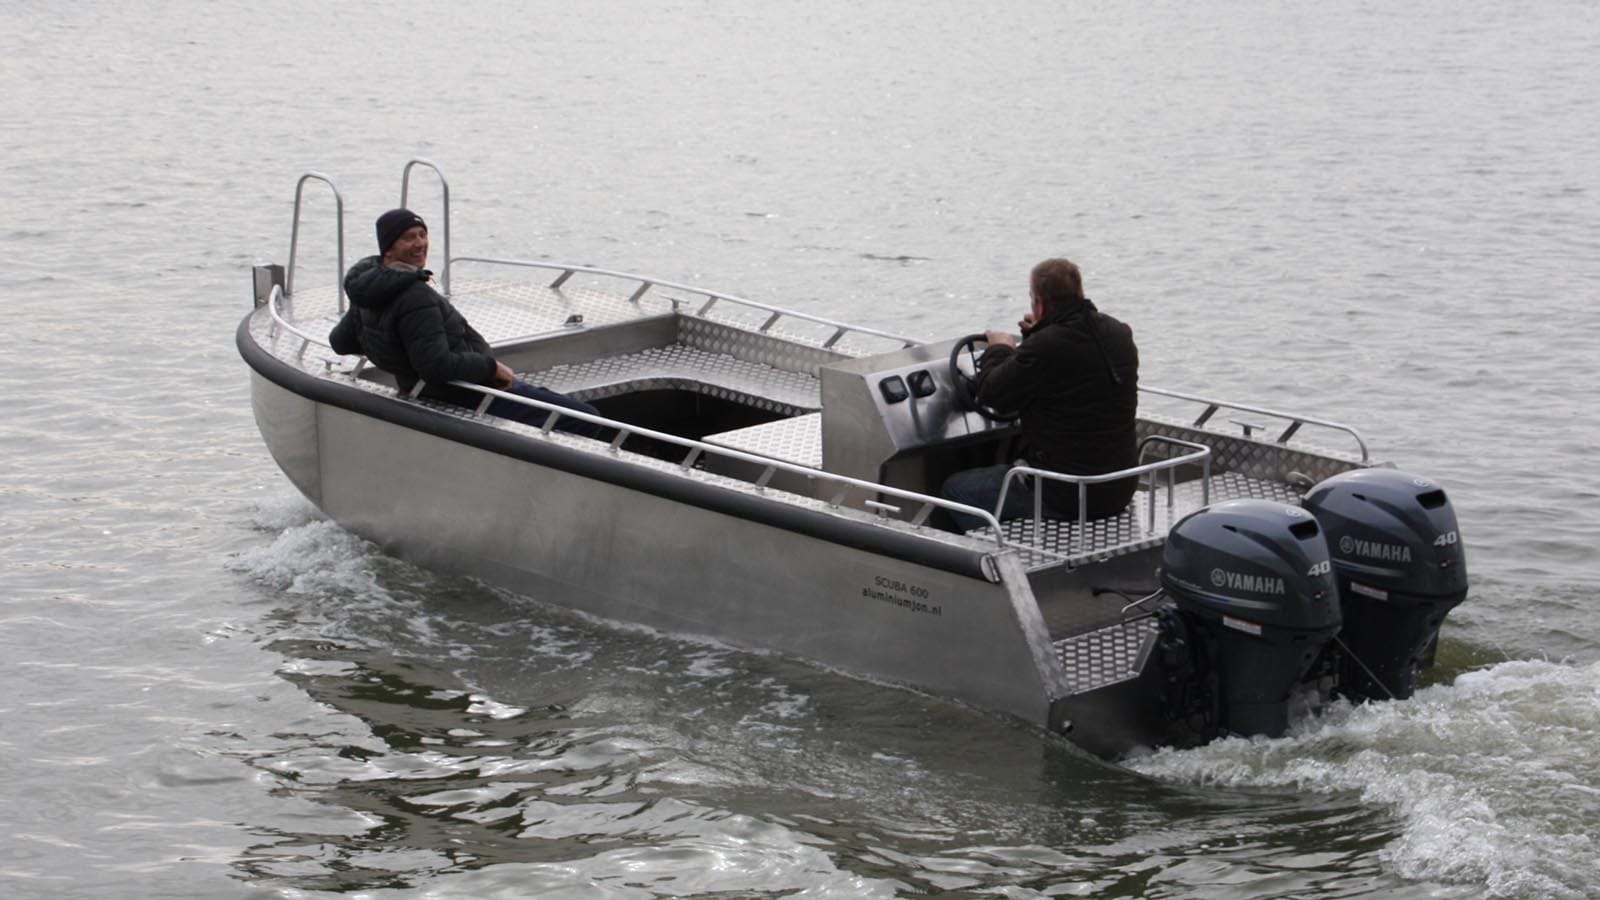 AluminiumJon.nl-Scuba 600-steering console in the middle and 2x 40 hp Yamaha outboard Motors